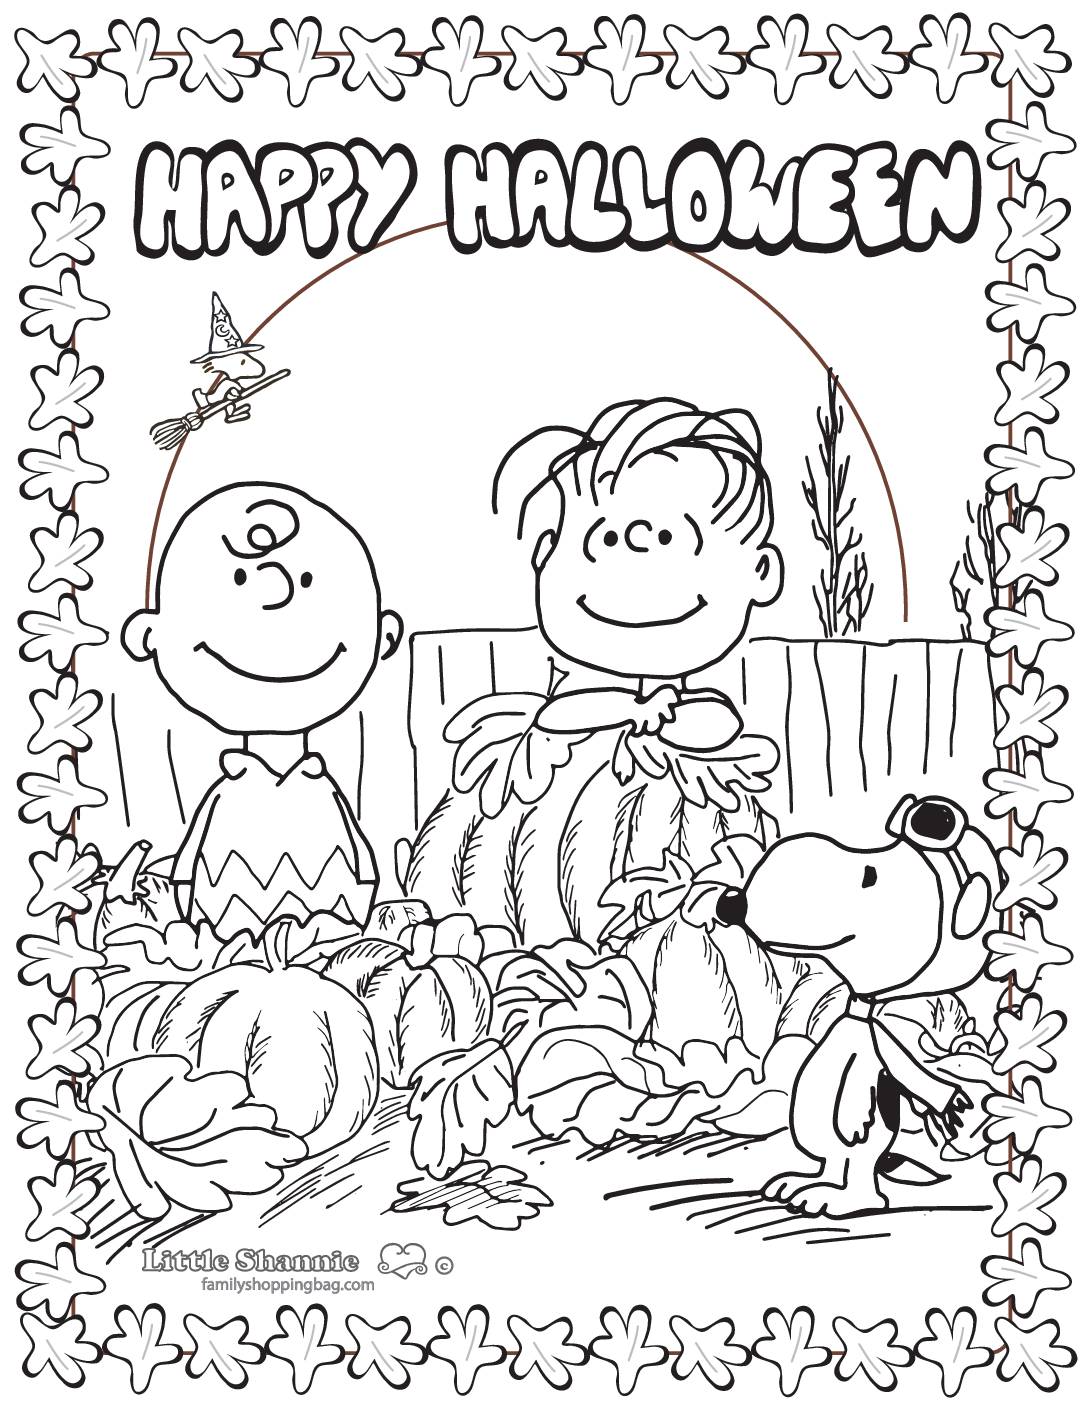 Coloring page peanuts halloween